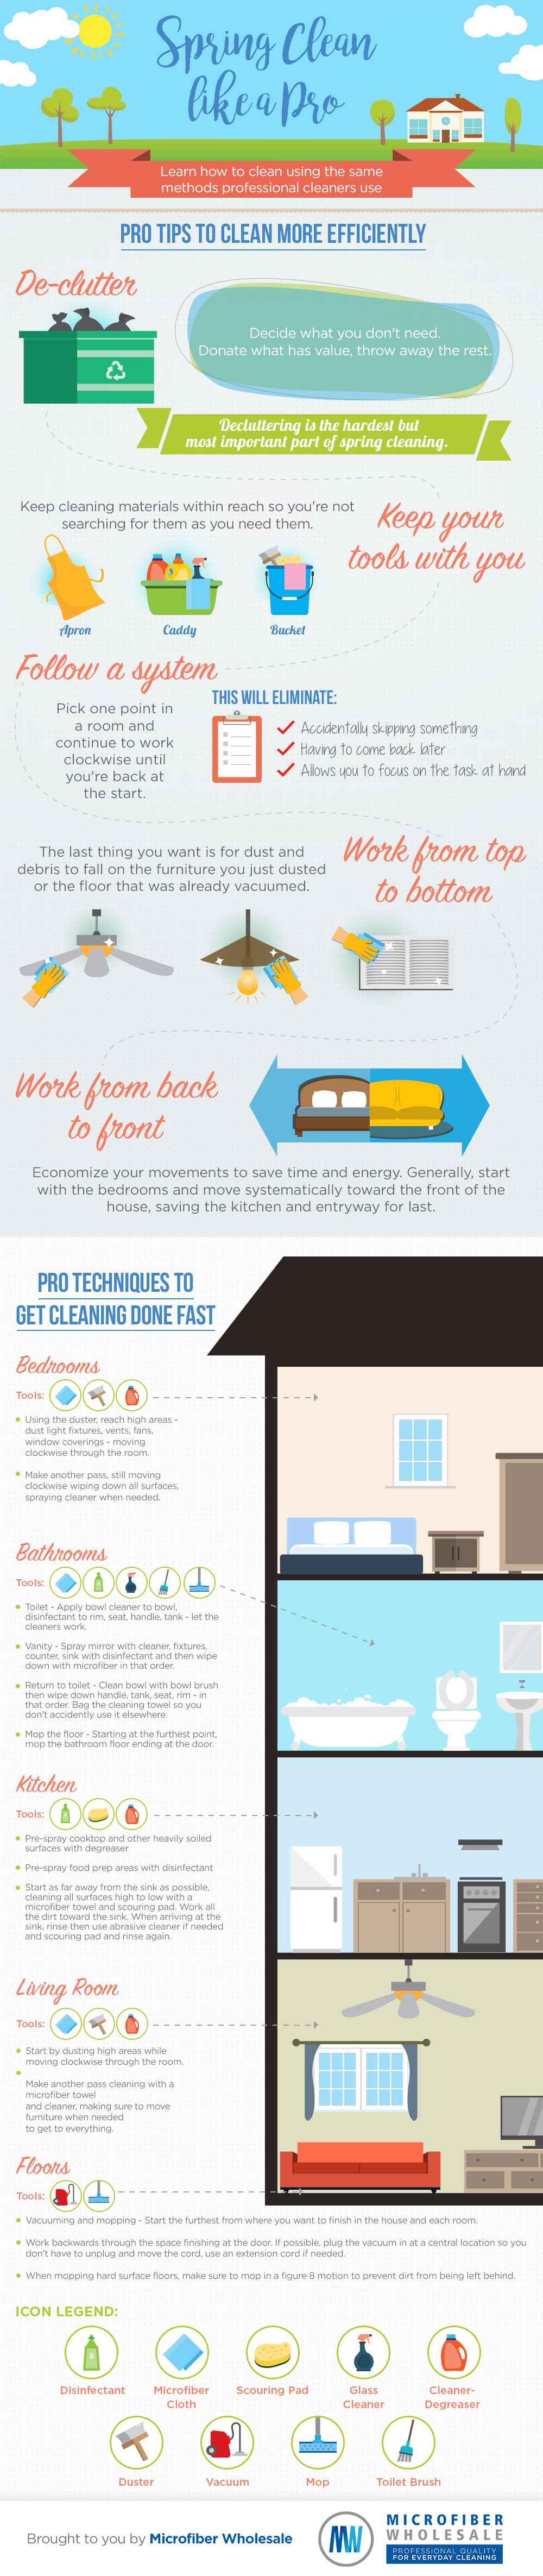 Pro-Level Cleaning Hacks - Infographic